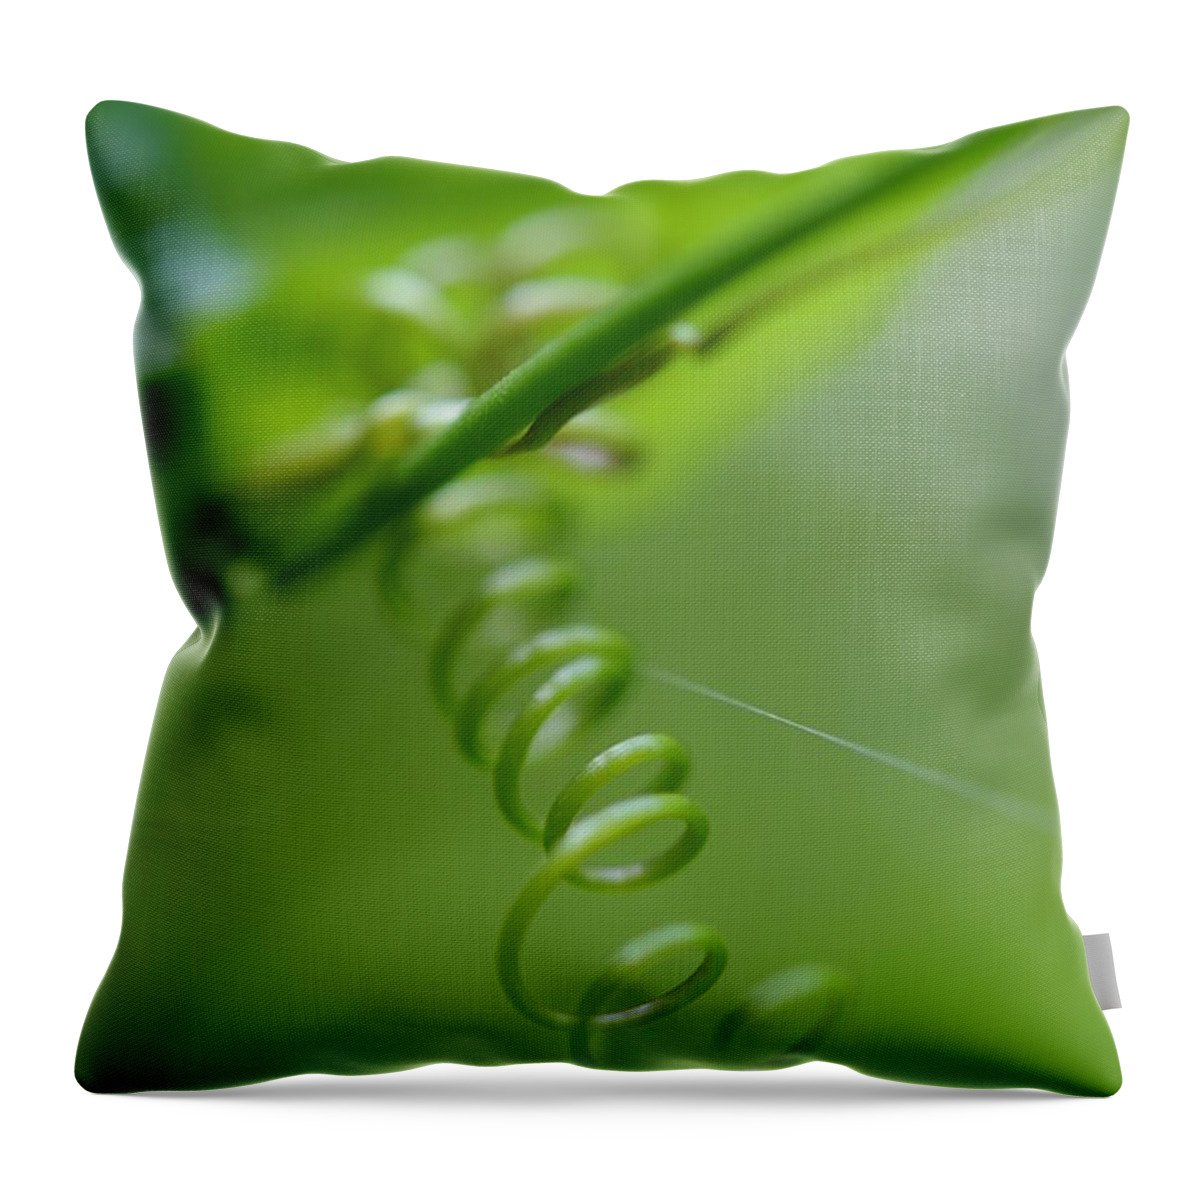 Macro Throw Pillow featuring the photograph Green Spiral by Jenny Rainbow